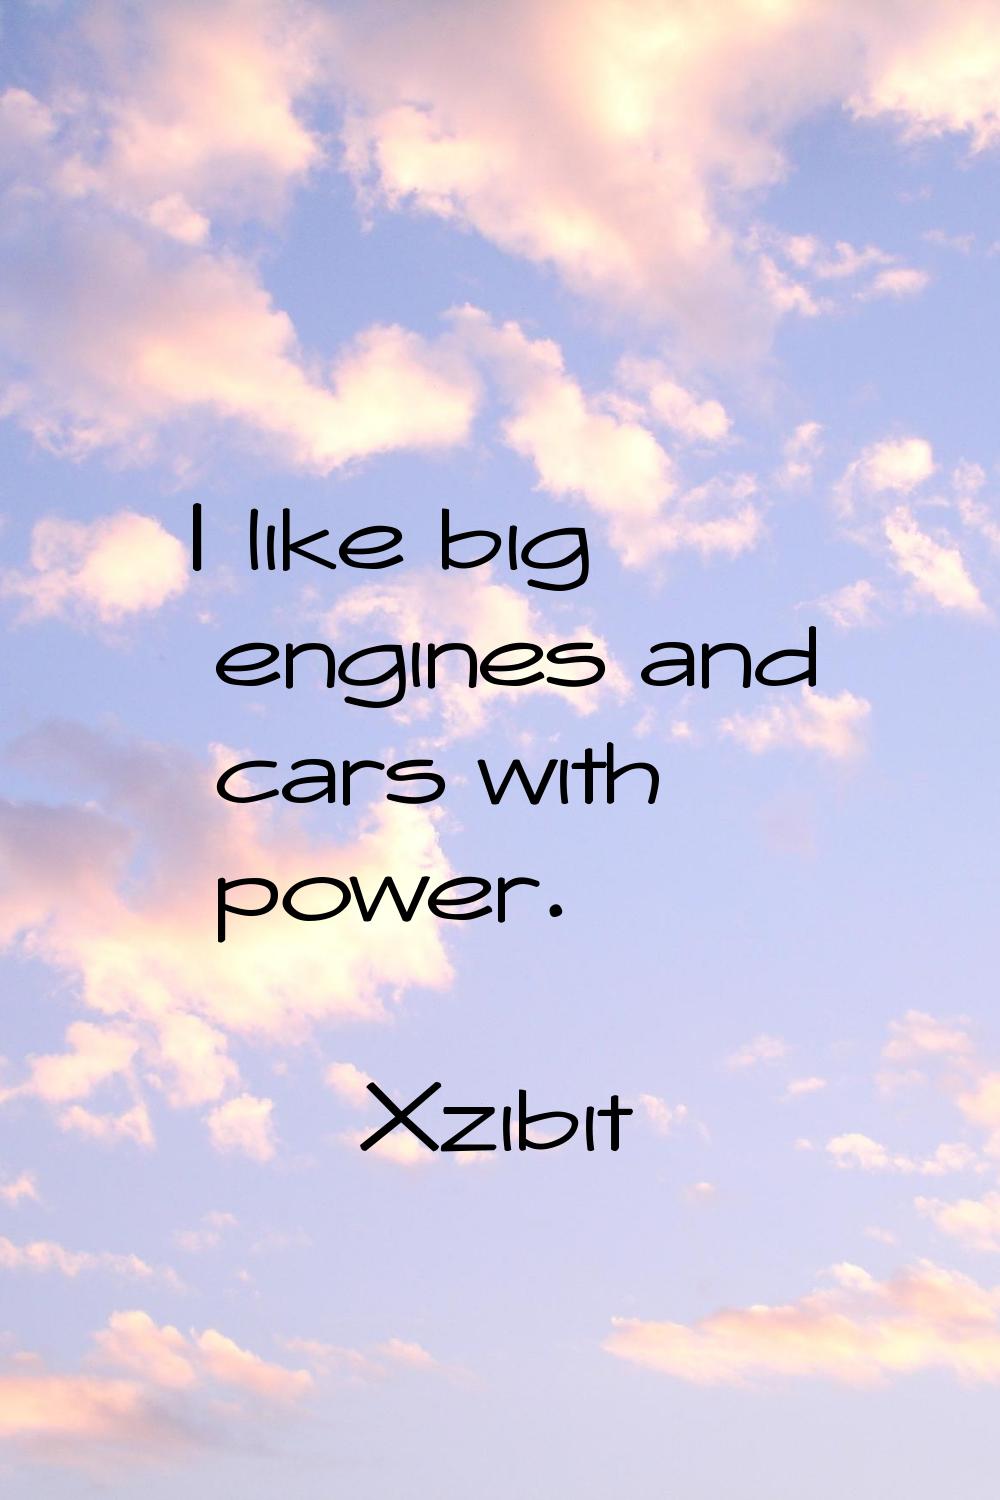 I like big engines and cars with power.